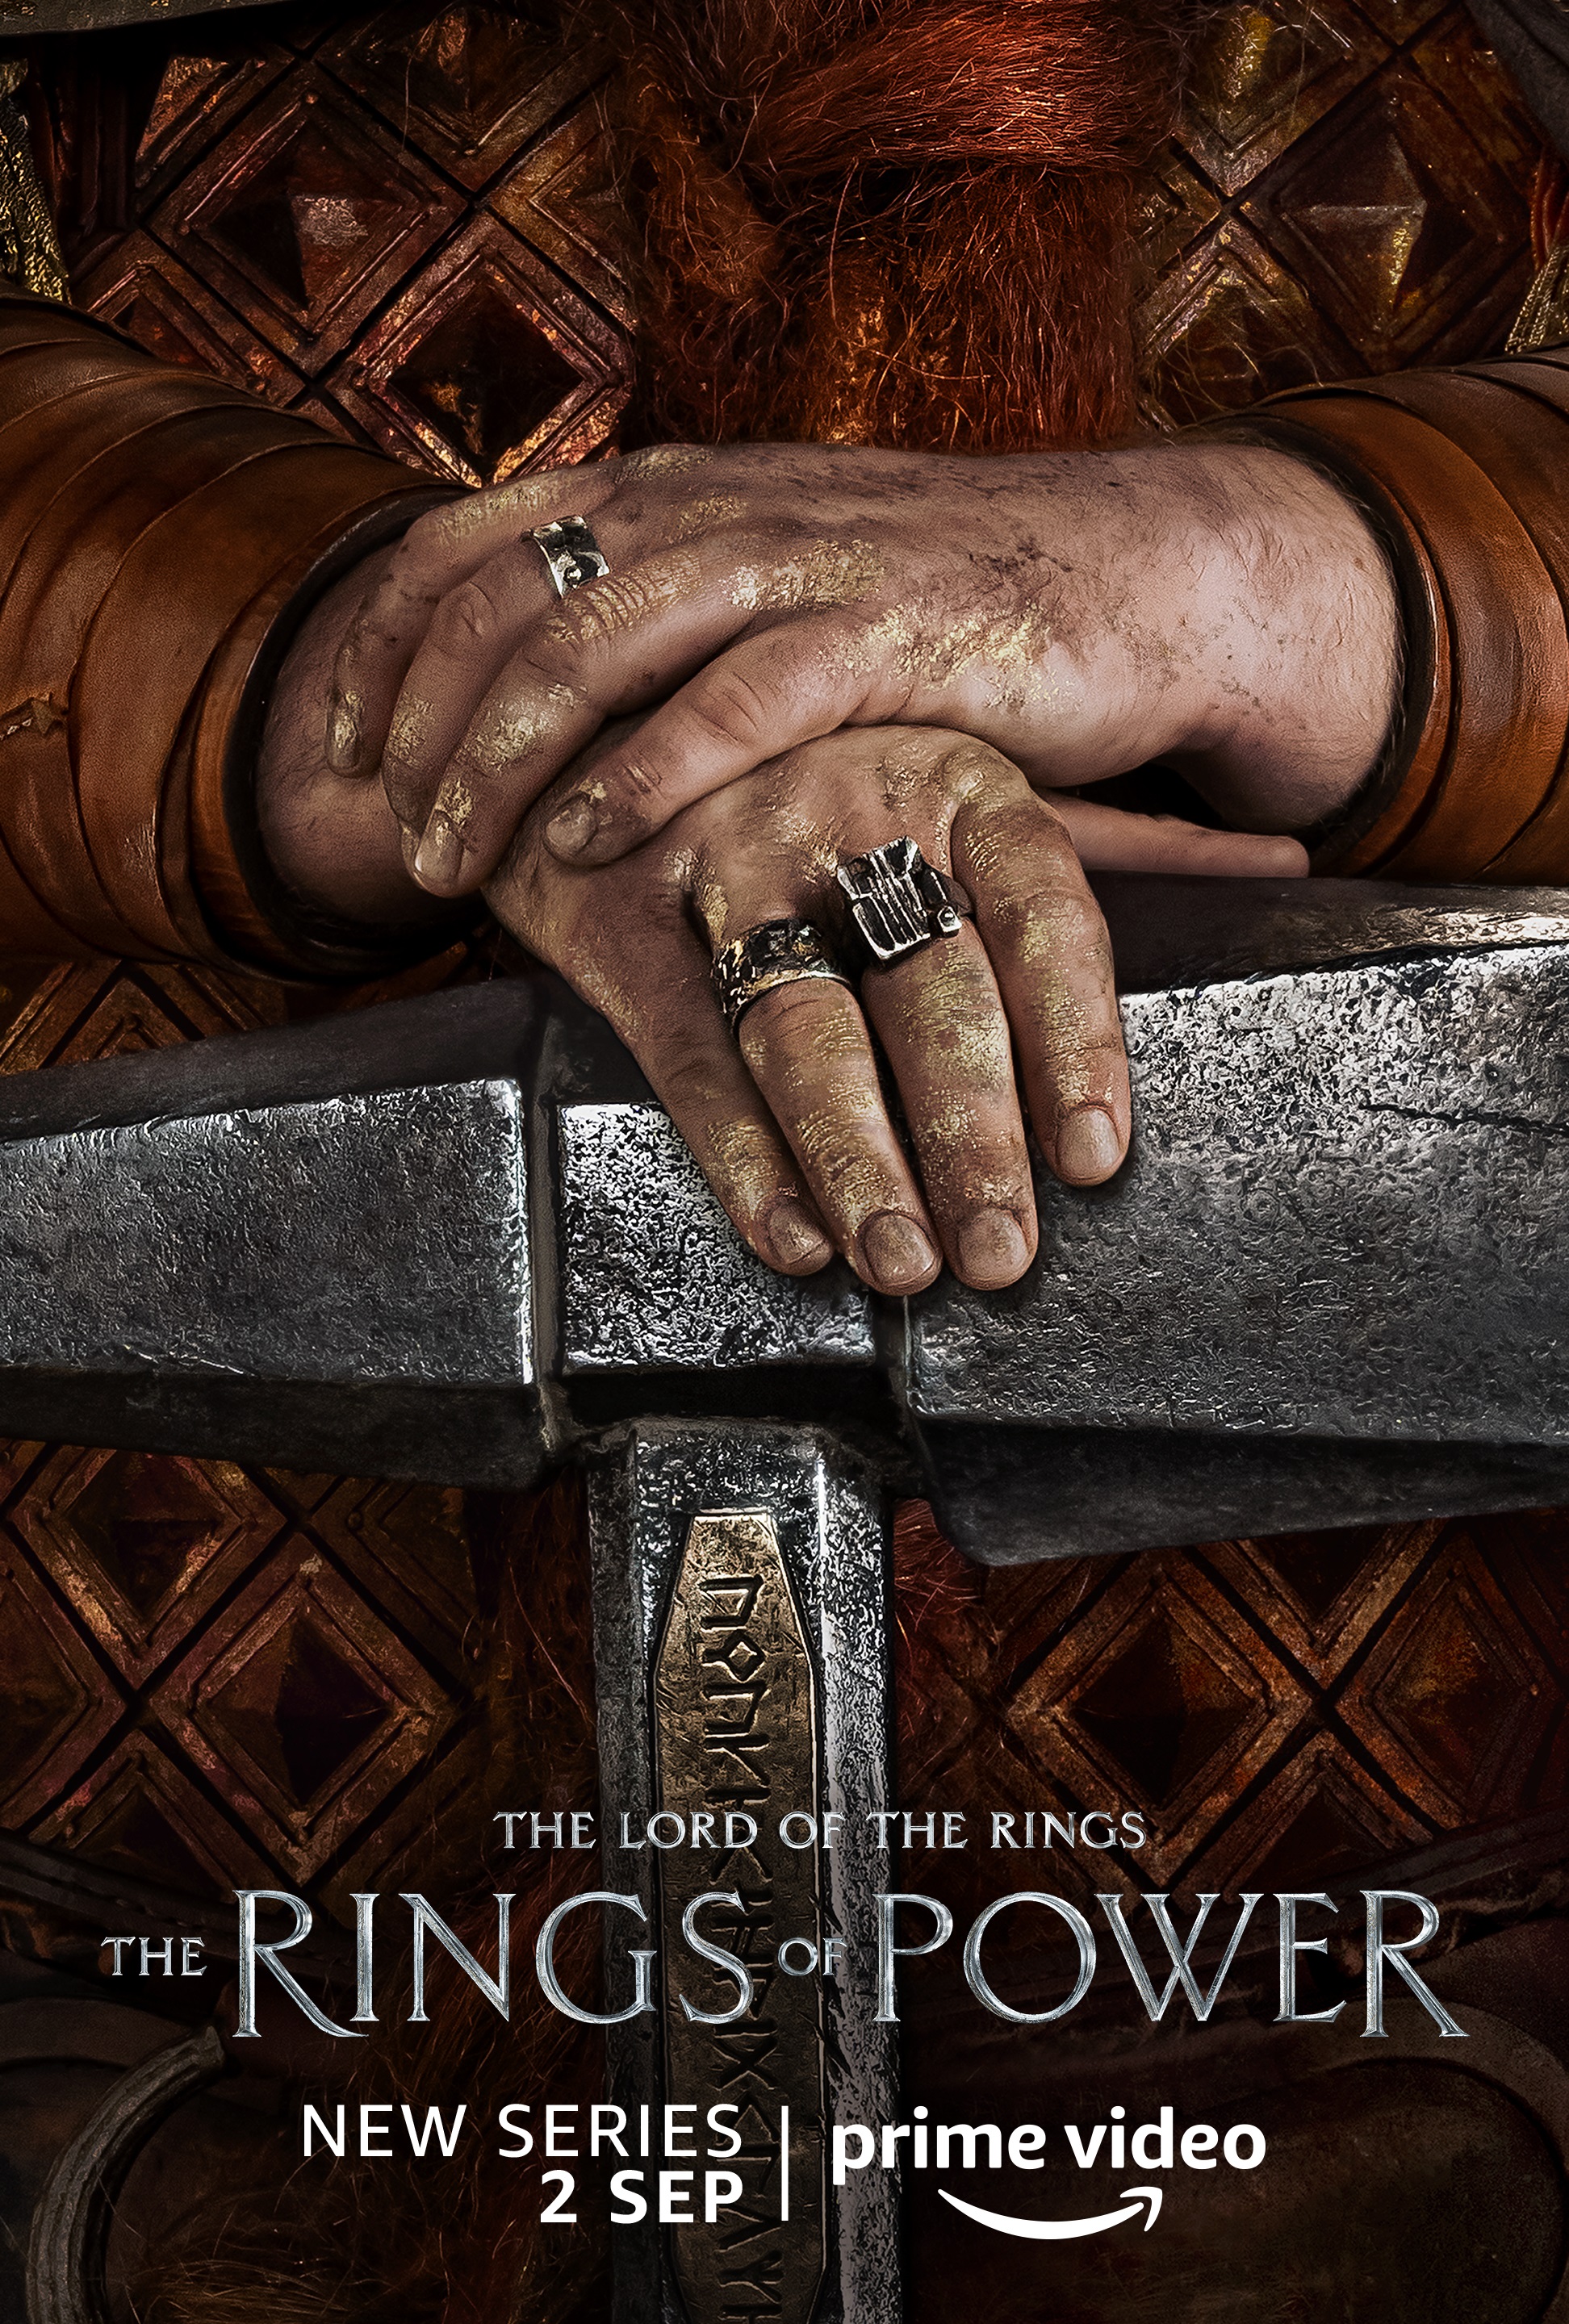 A dwarf character poster for Lord of the Rings: The Rings of Power